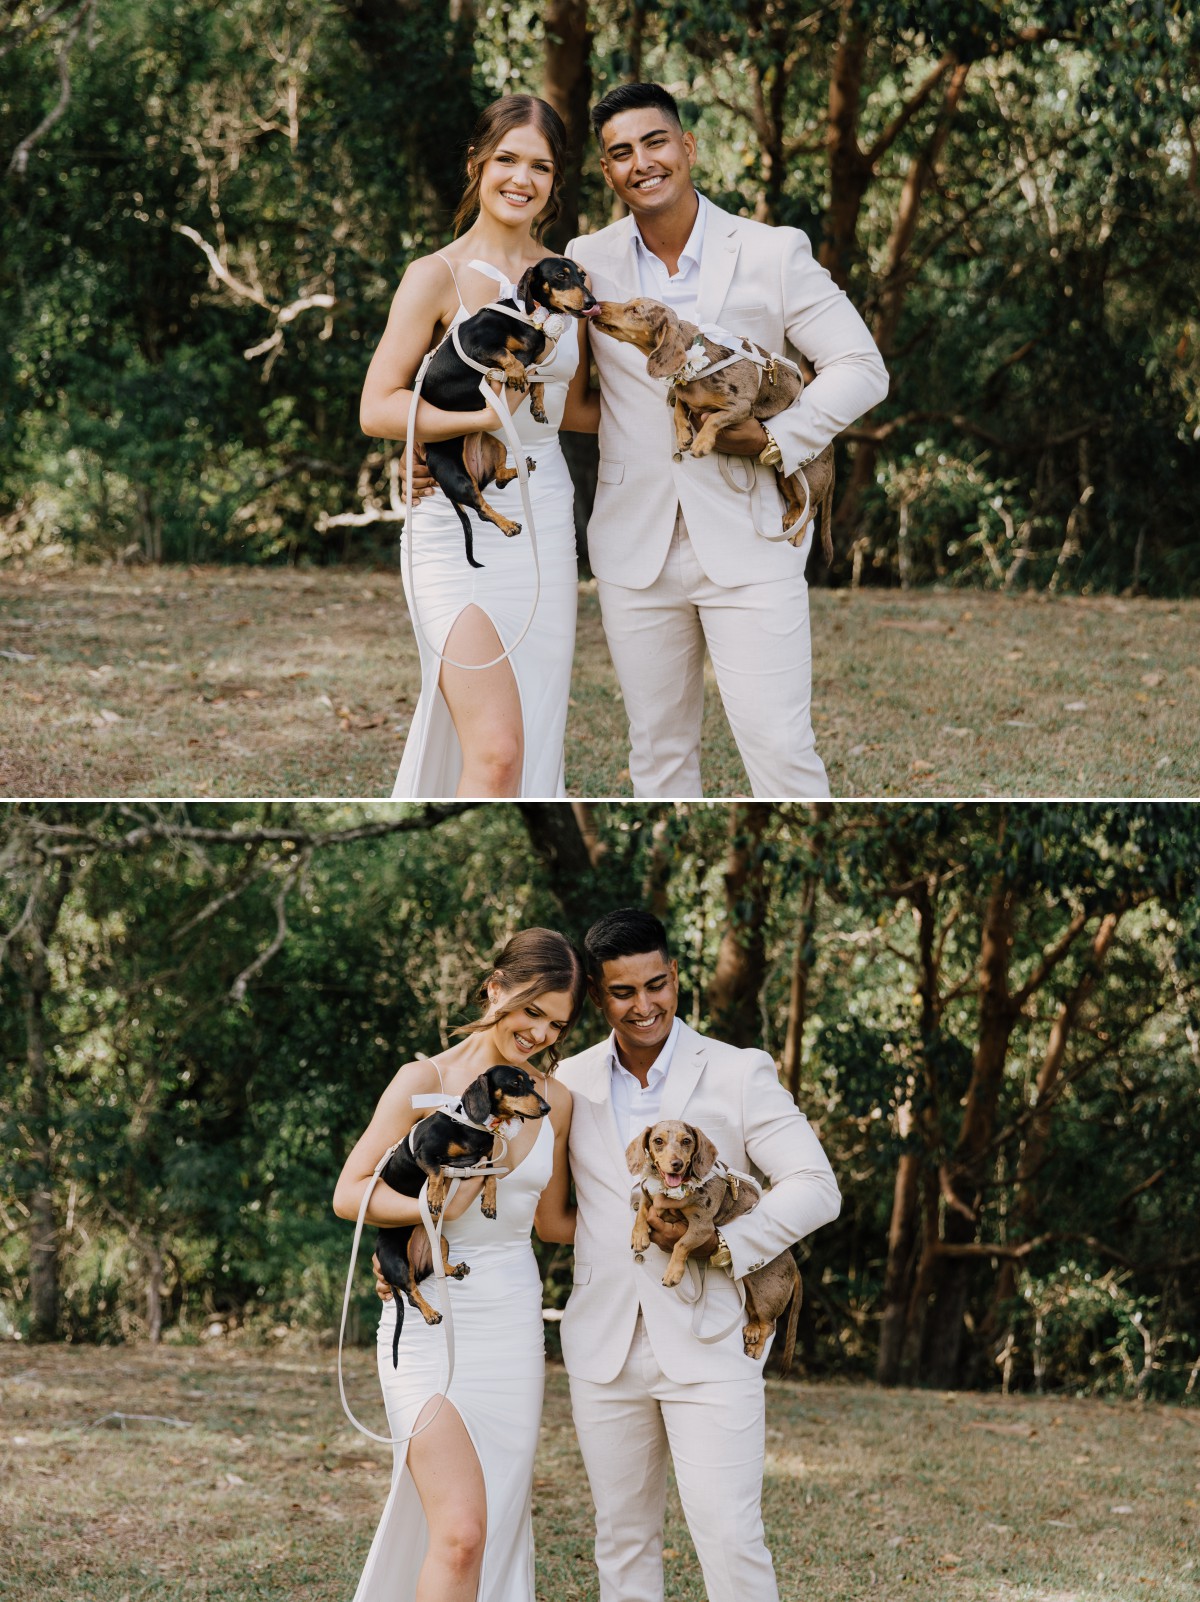 Bride and Groom wedding photos with their dogs